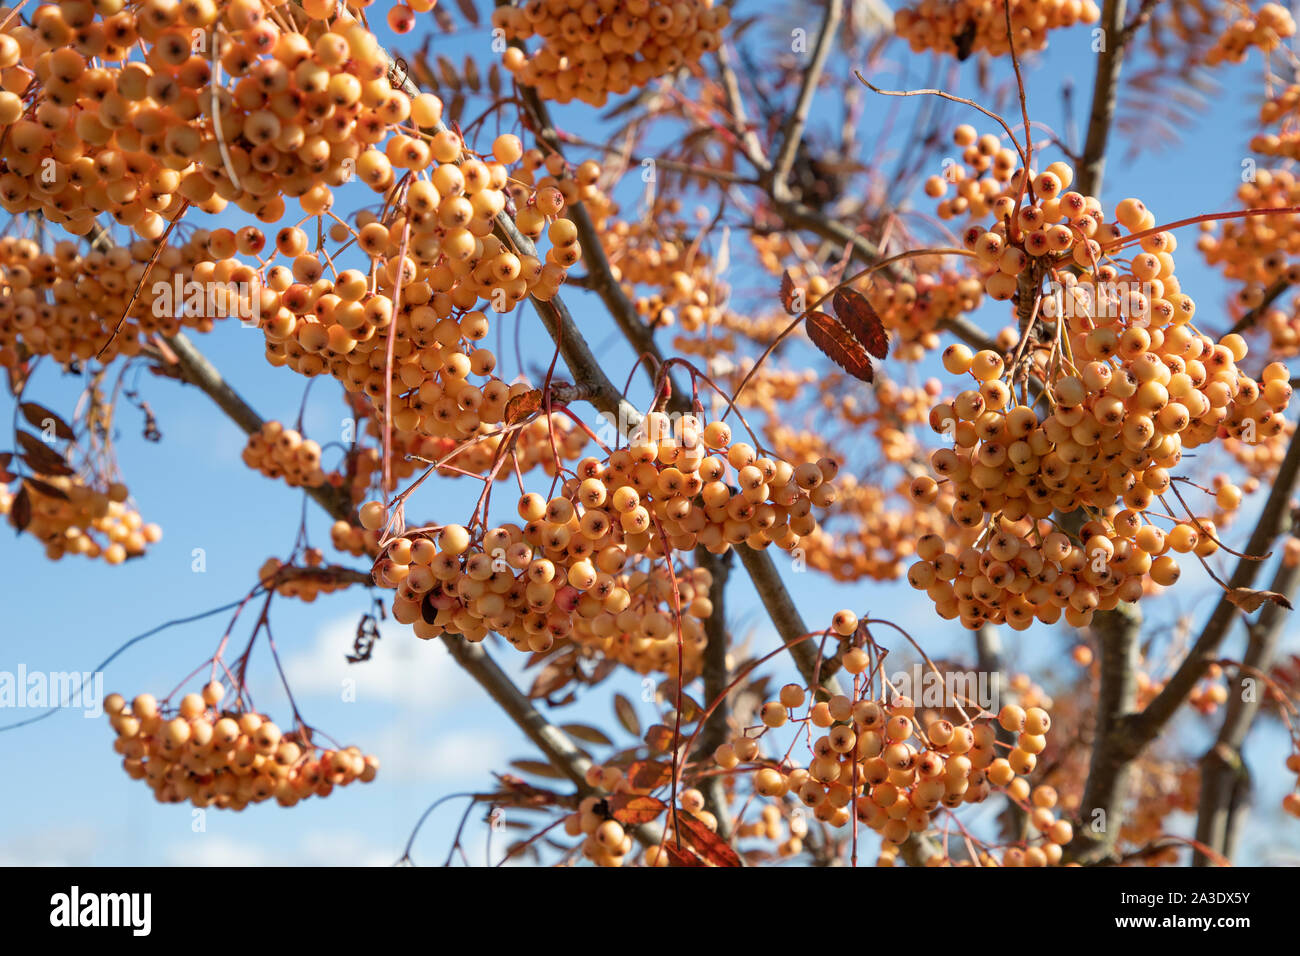 A cluster of rowan berries hanging on a leafless mountain ash tree Stock Photo